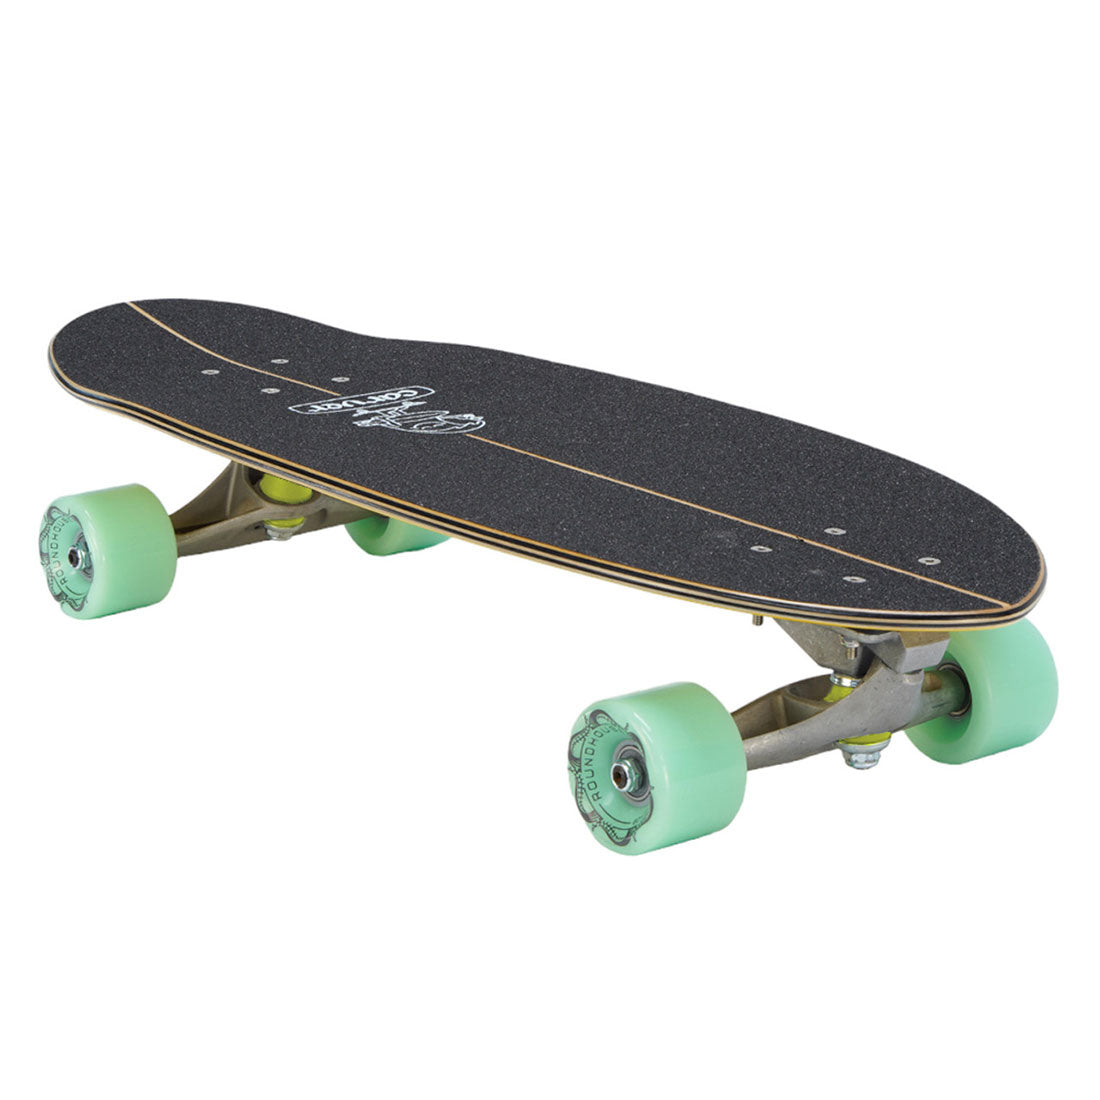 Carver Octo Goner 25 C5 Mini Complete Skateboard Compl Carving and Specialty